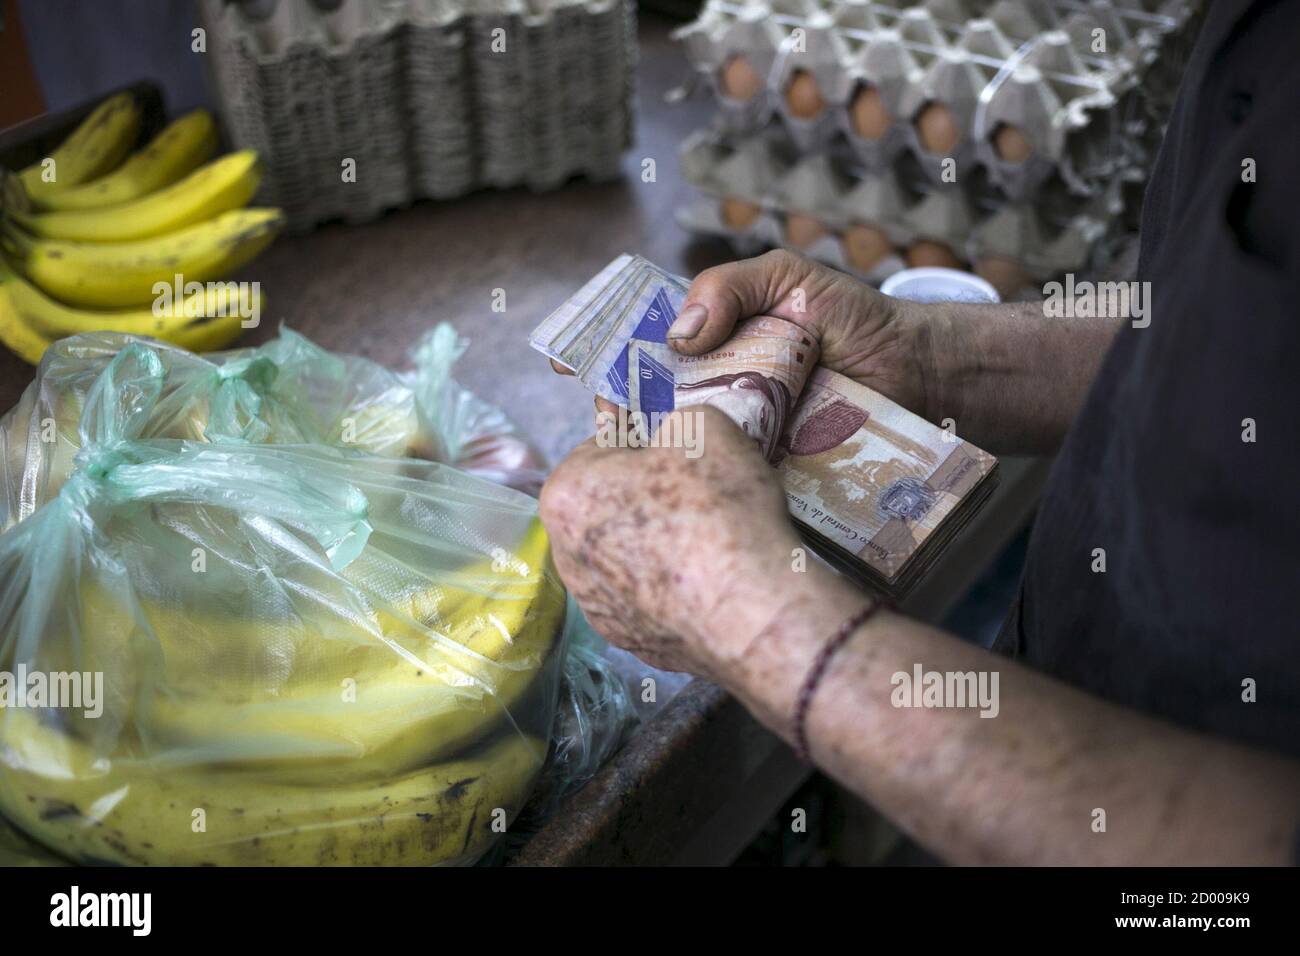 A clerk counts Venezuelan bolivar banknotes after selling goods to a customer at a fruit and vegetable store in Caracas July 10, 2015. A debilitating recession and a drop in oil prices have harmed the OPEC nation's ability to provide dollars through its complex three-tiered currency control system, pushing up the black market rate at a dizzying speed. The bolivar sank past 600 per U.S. dollar on Thursday, compared with 73 a year ago, according to anti-government website DolarToday. REUTERS/Marco Bello Stock Photo